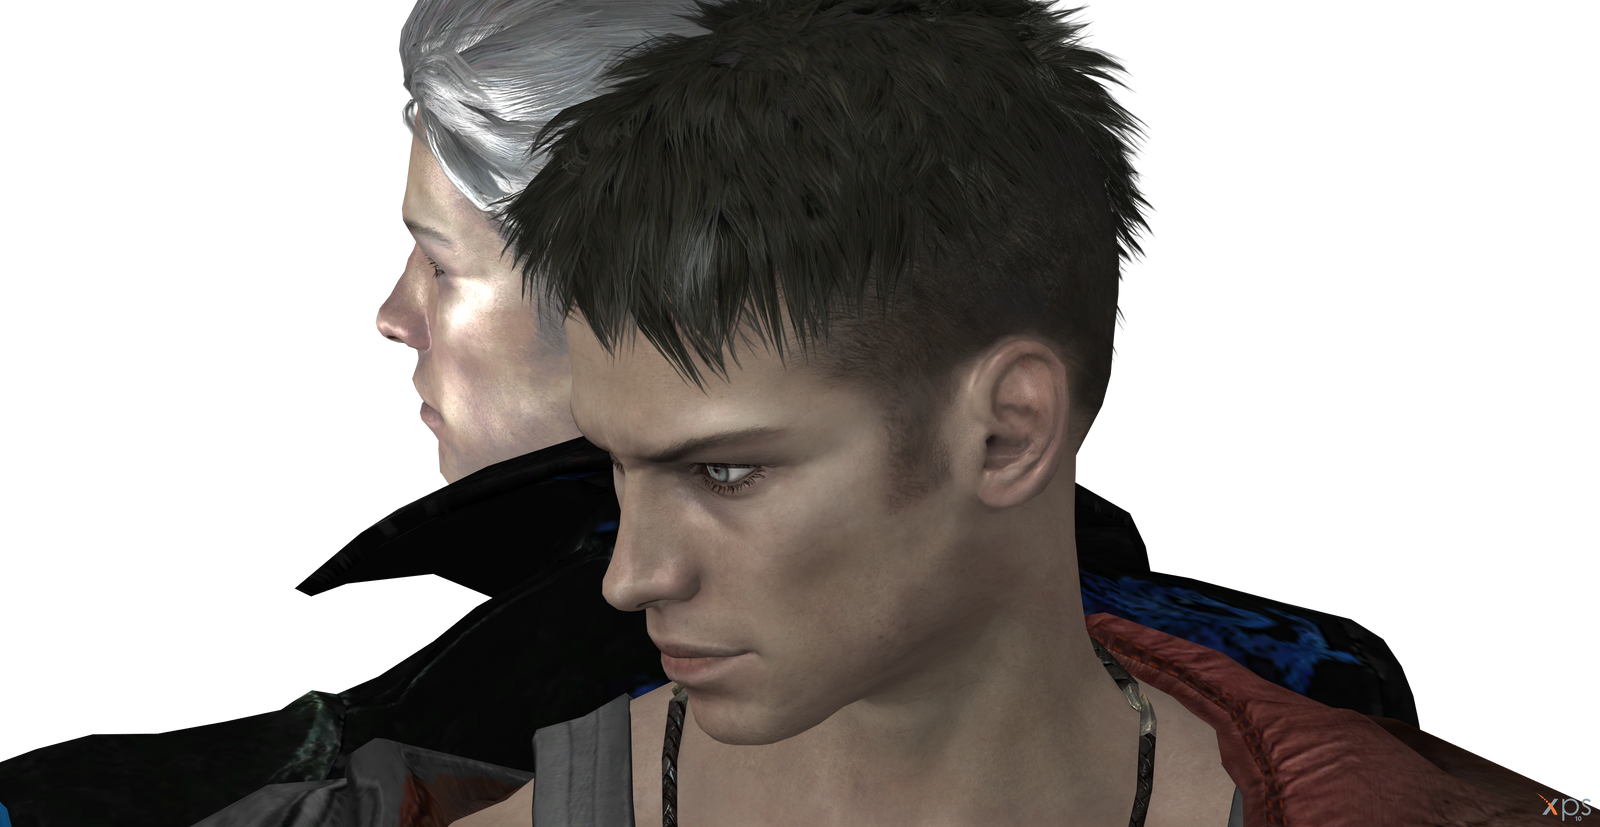 Pin by Piers on Devil May Cry  Dante devil may cry, Devil may cry